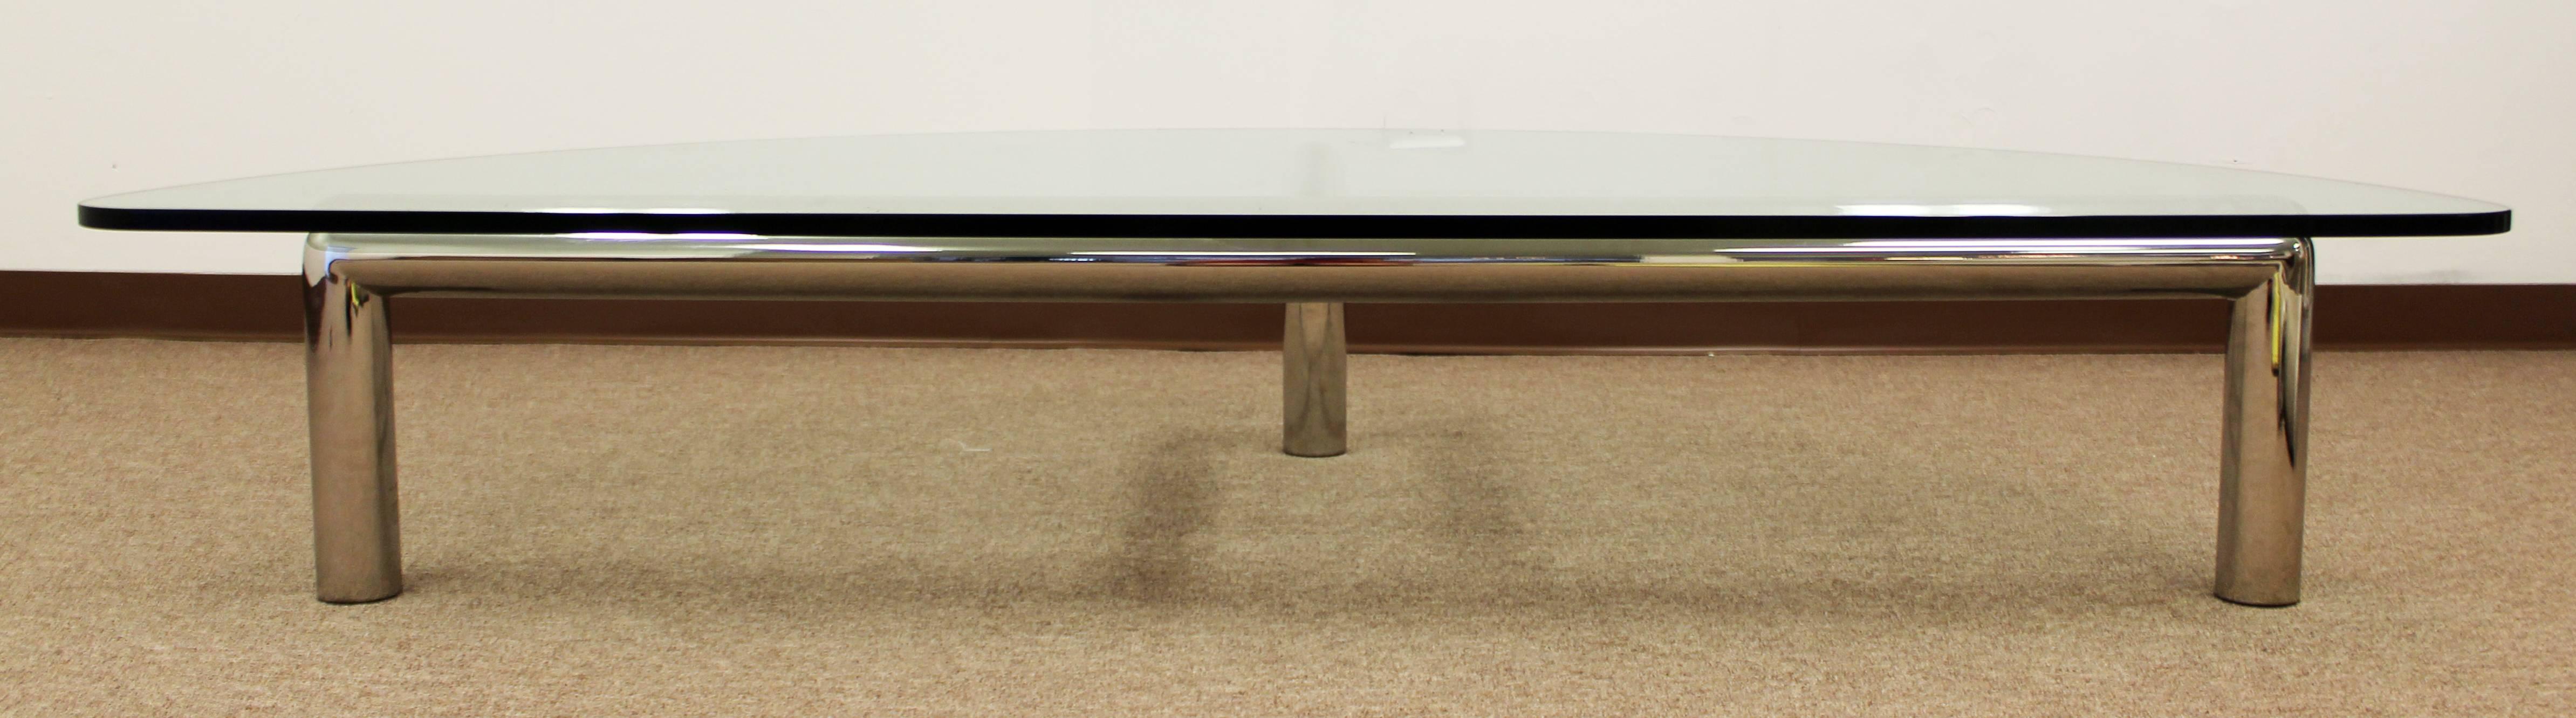 American Mid-Century Modern Pace Attributed Large Glass Tubular Chrome Coffee Table